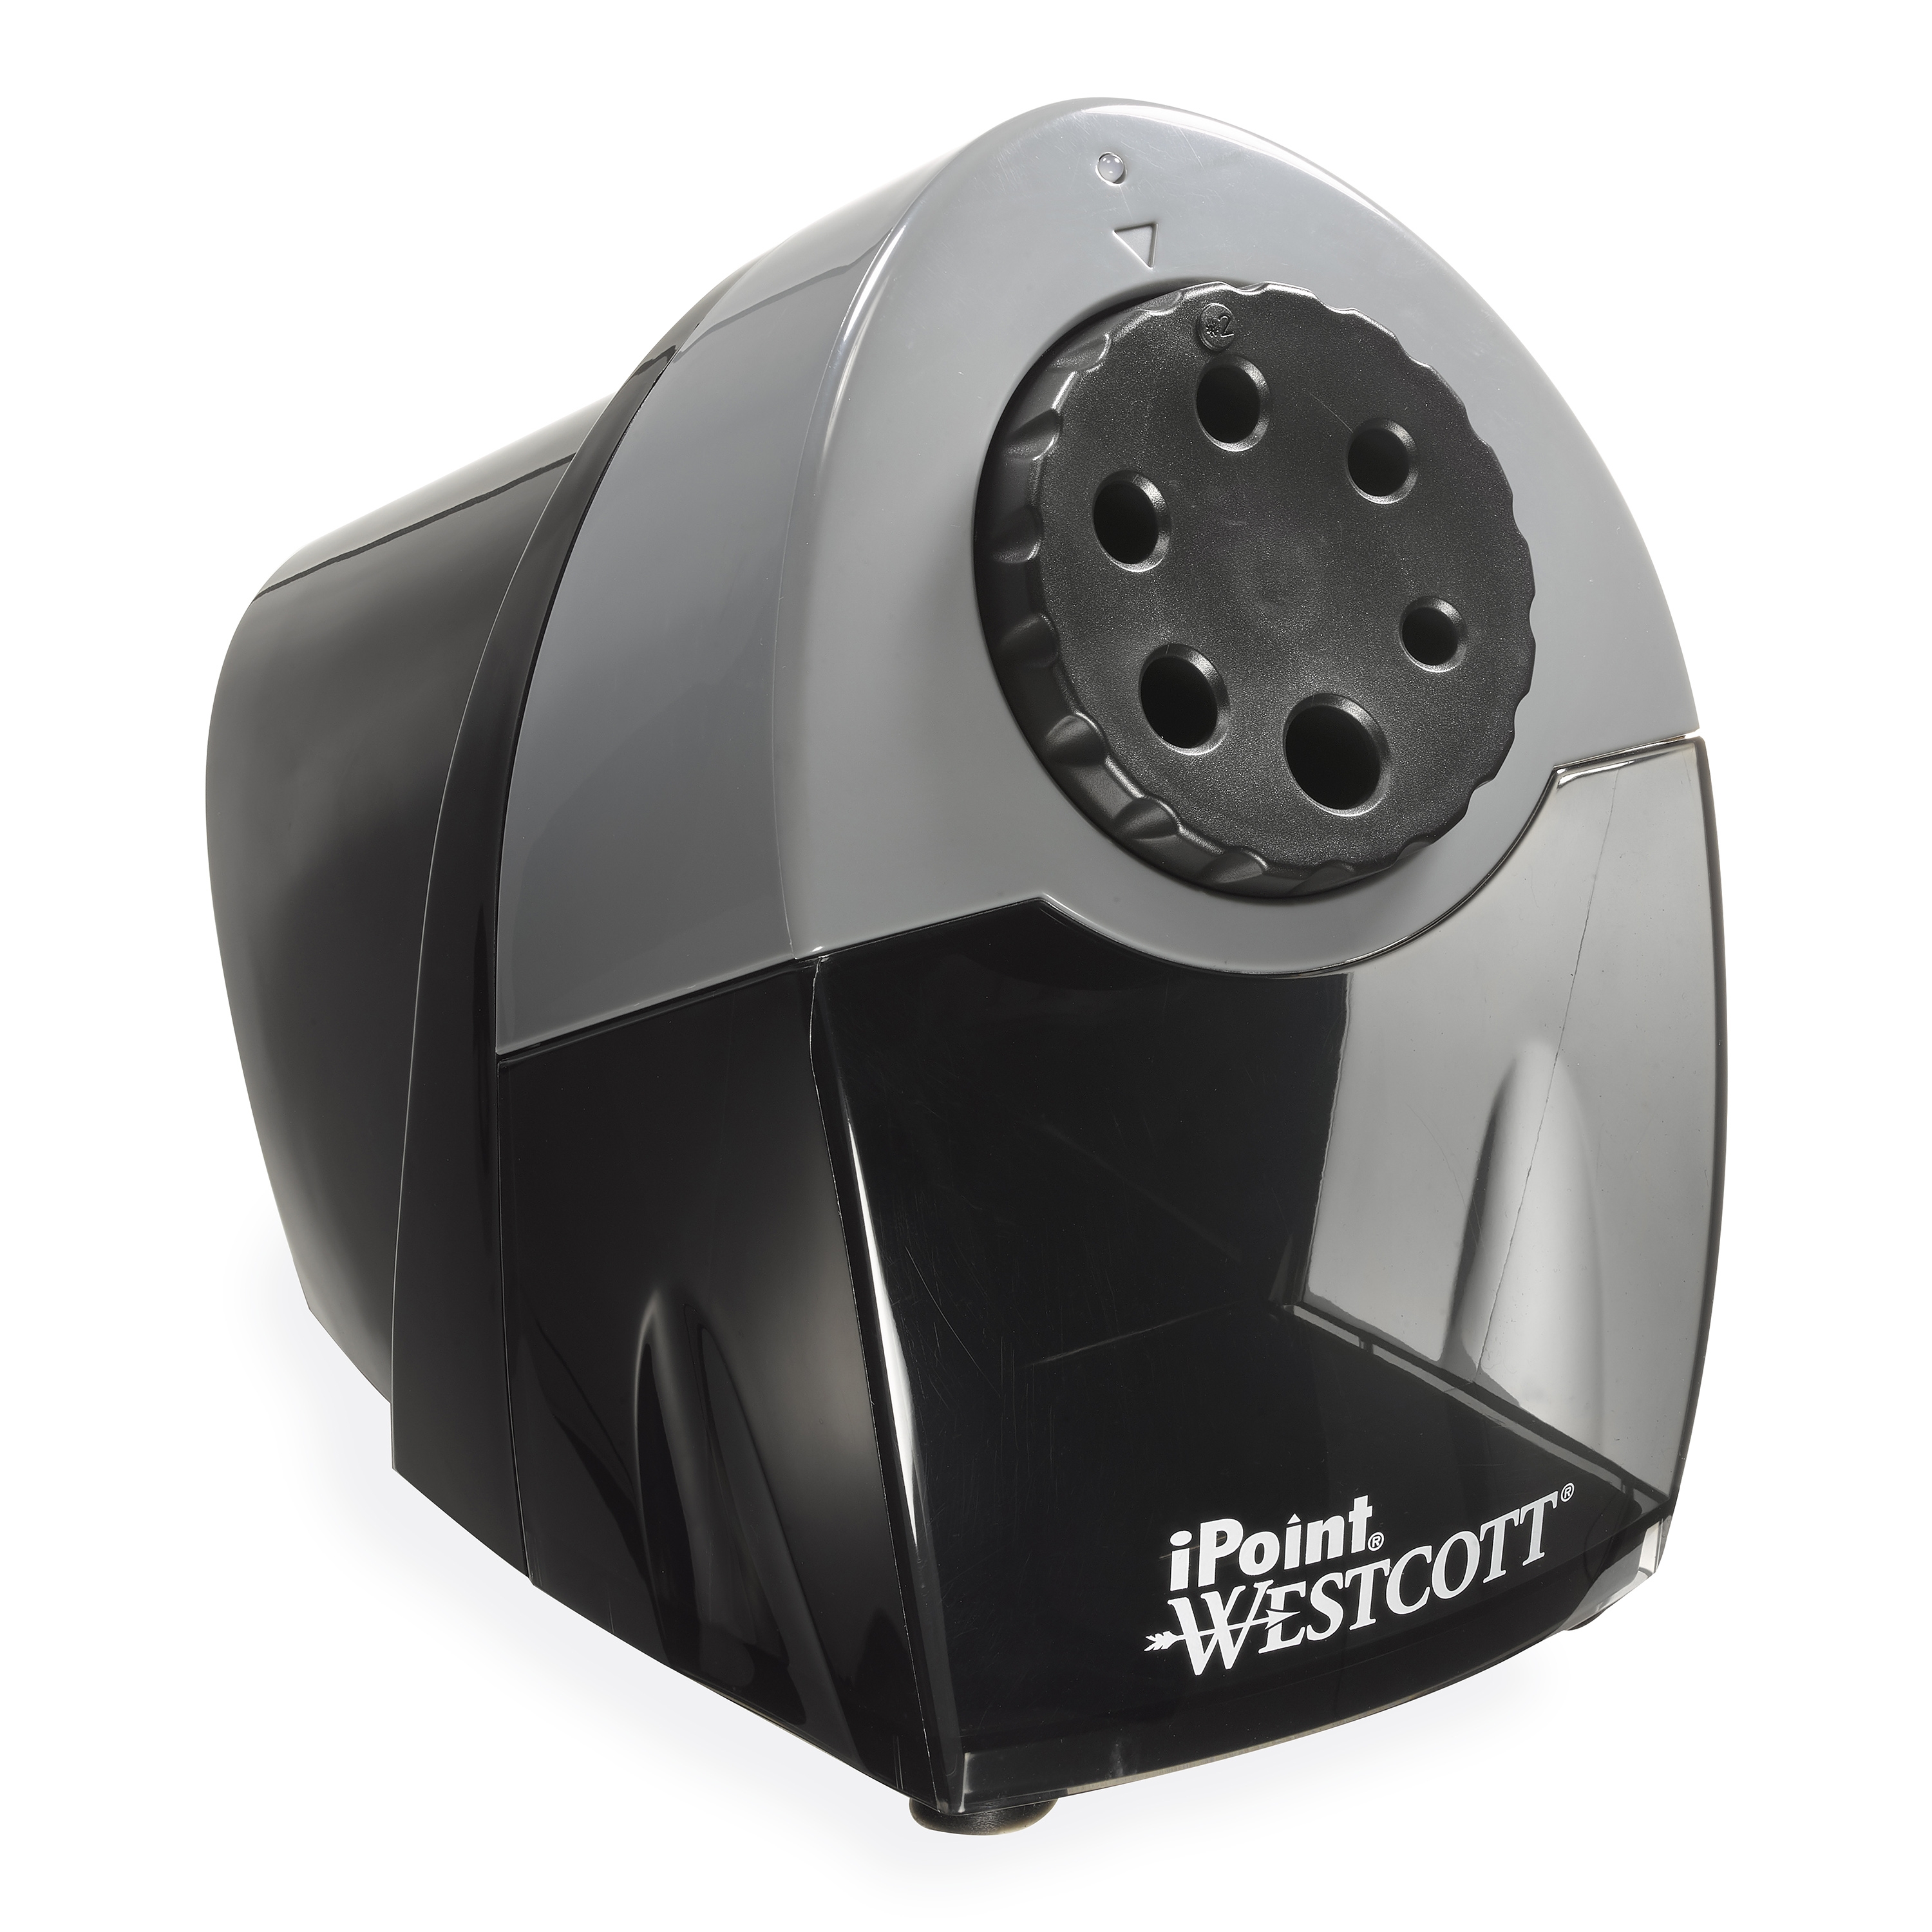 Westcott iPoint Commercial Heavy Duty Electric Pencil Sharpener (16934)